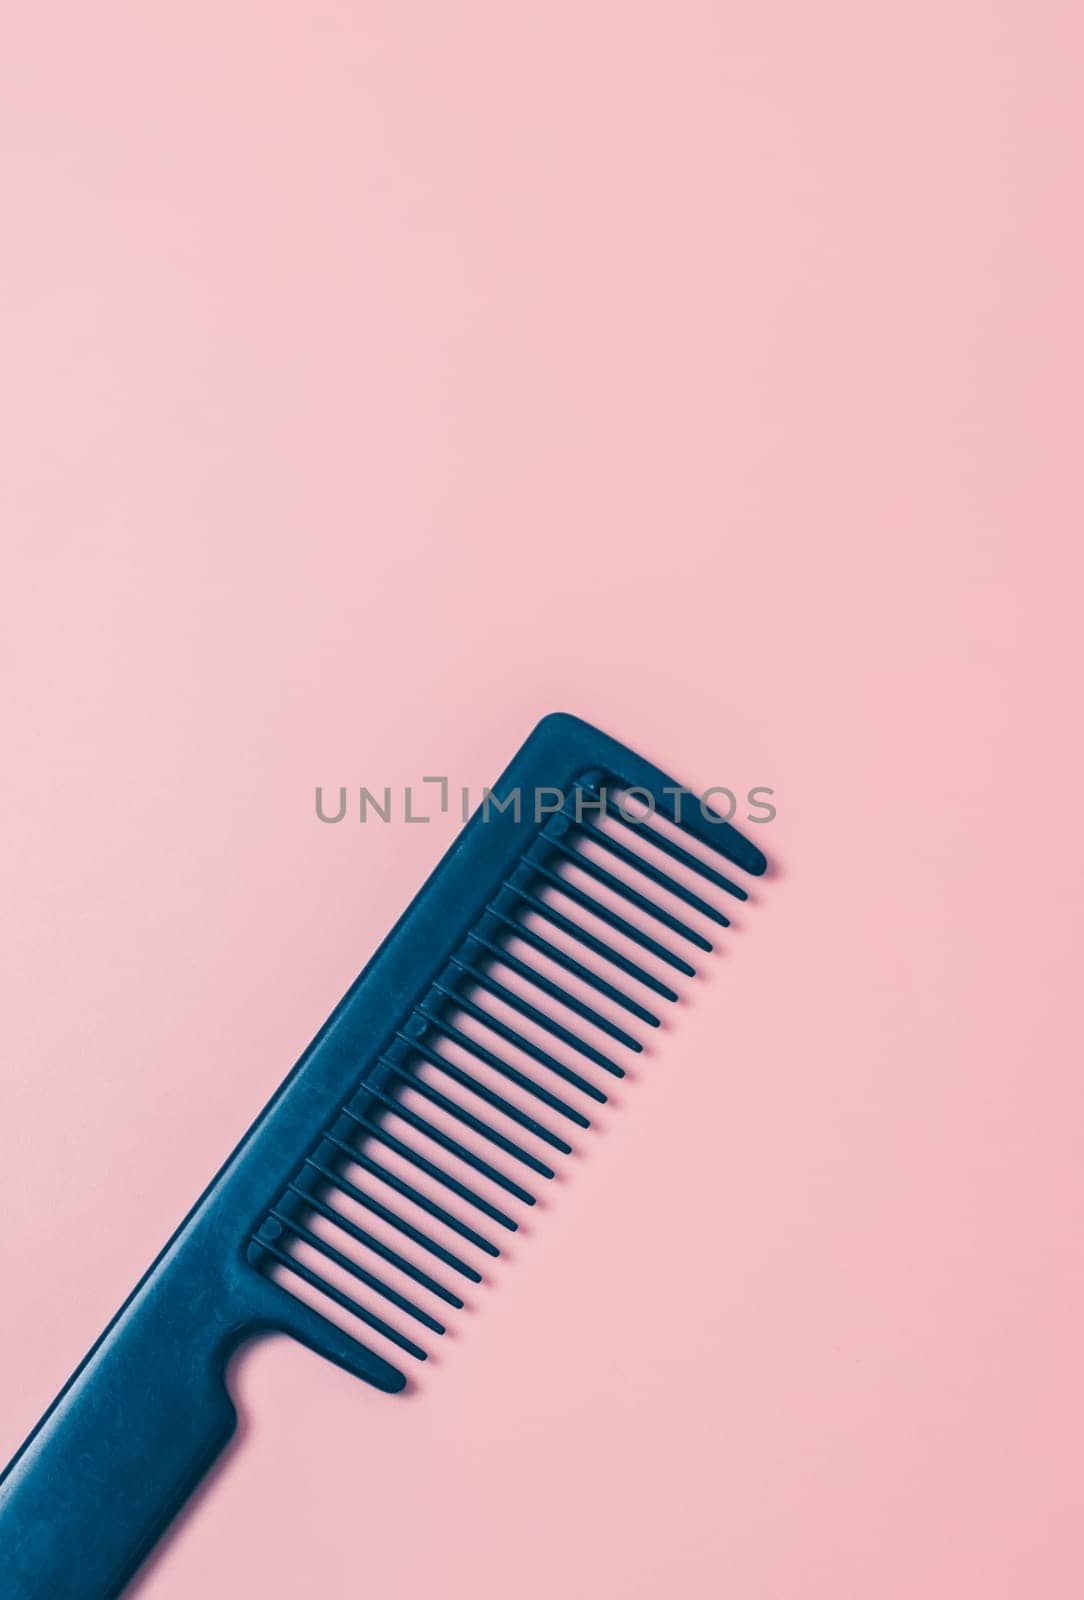 One black comb hairdresser on a pink background, flat lay close up. The concept of hairdressing, beauty salon, tools.